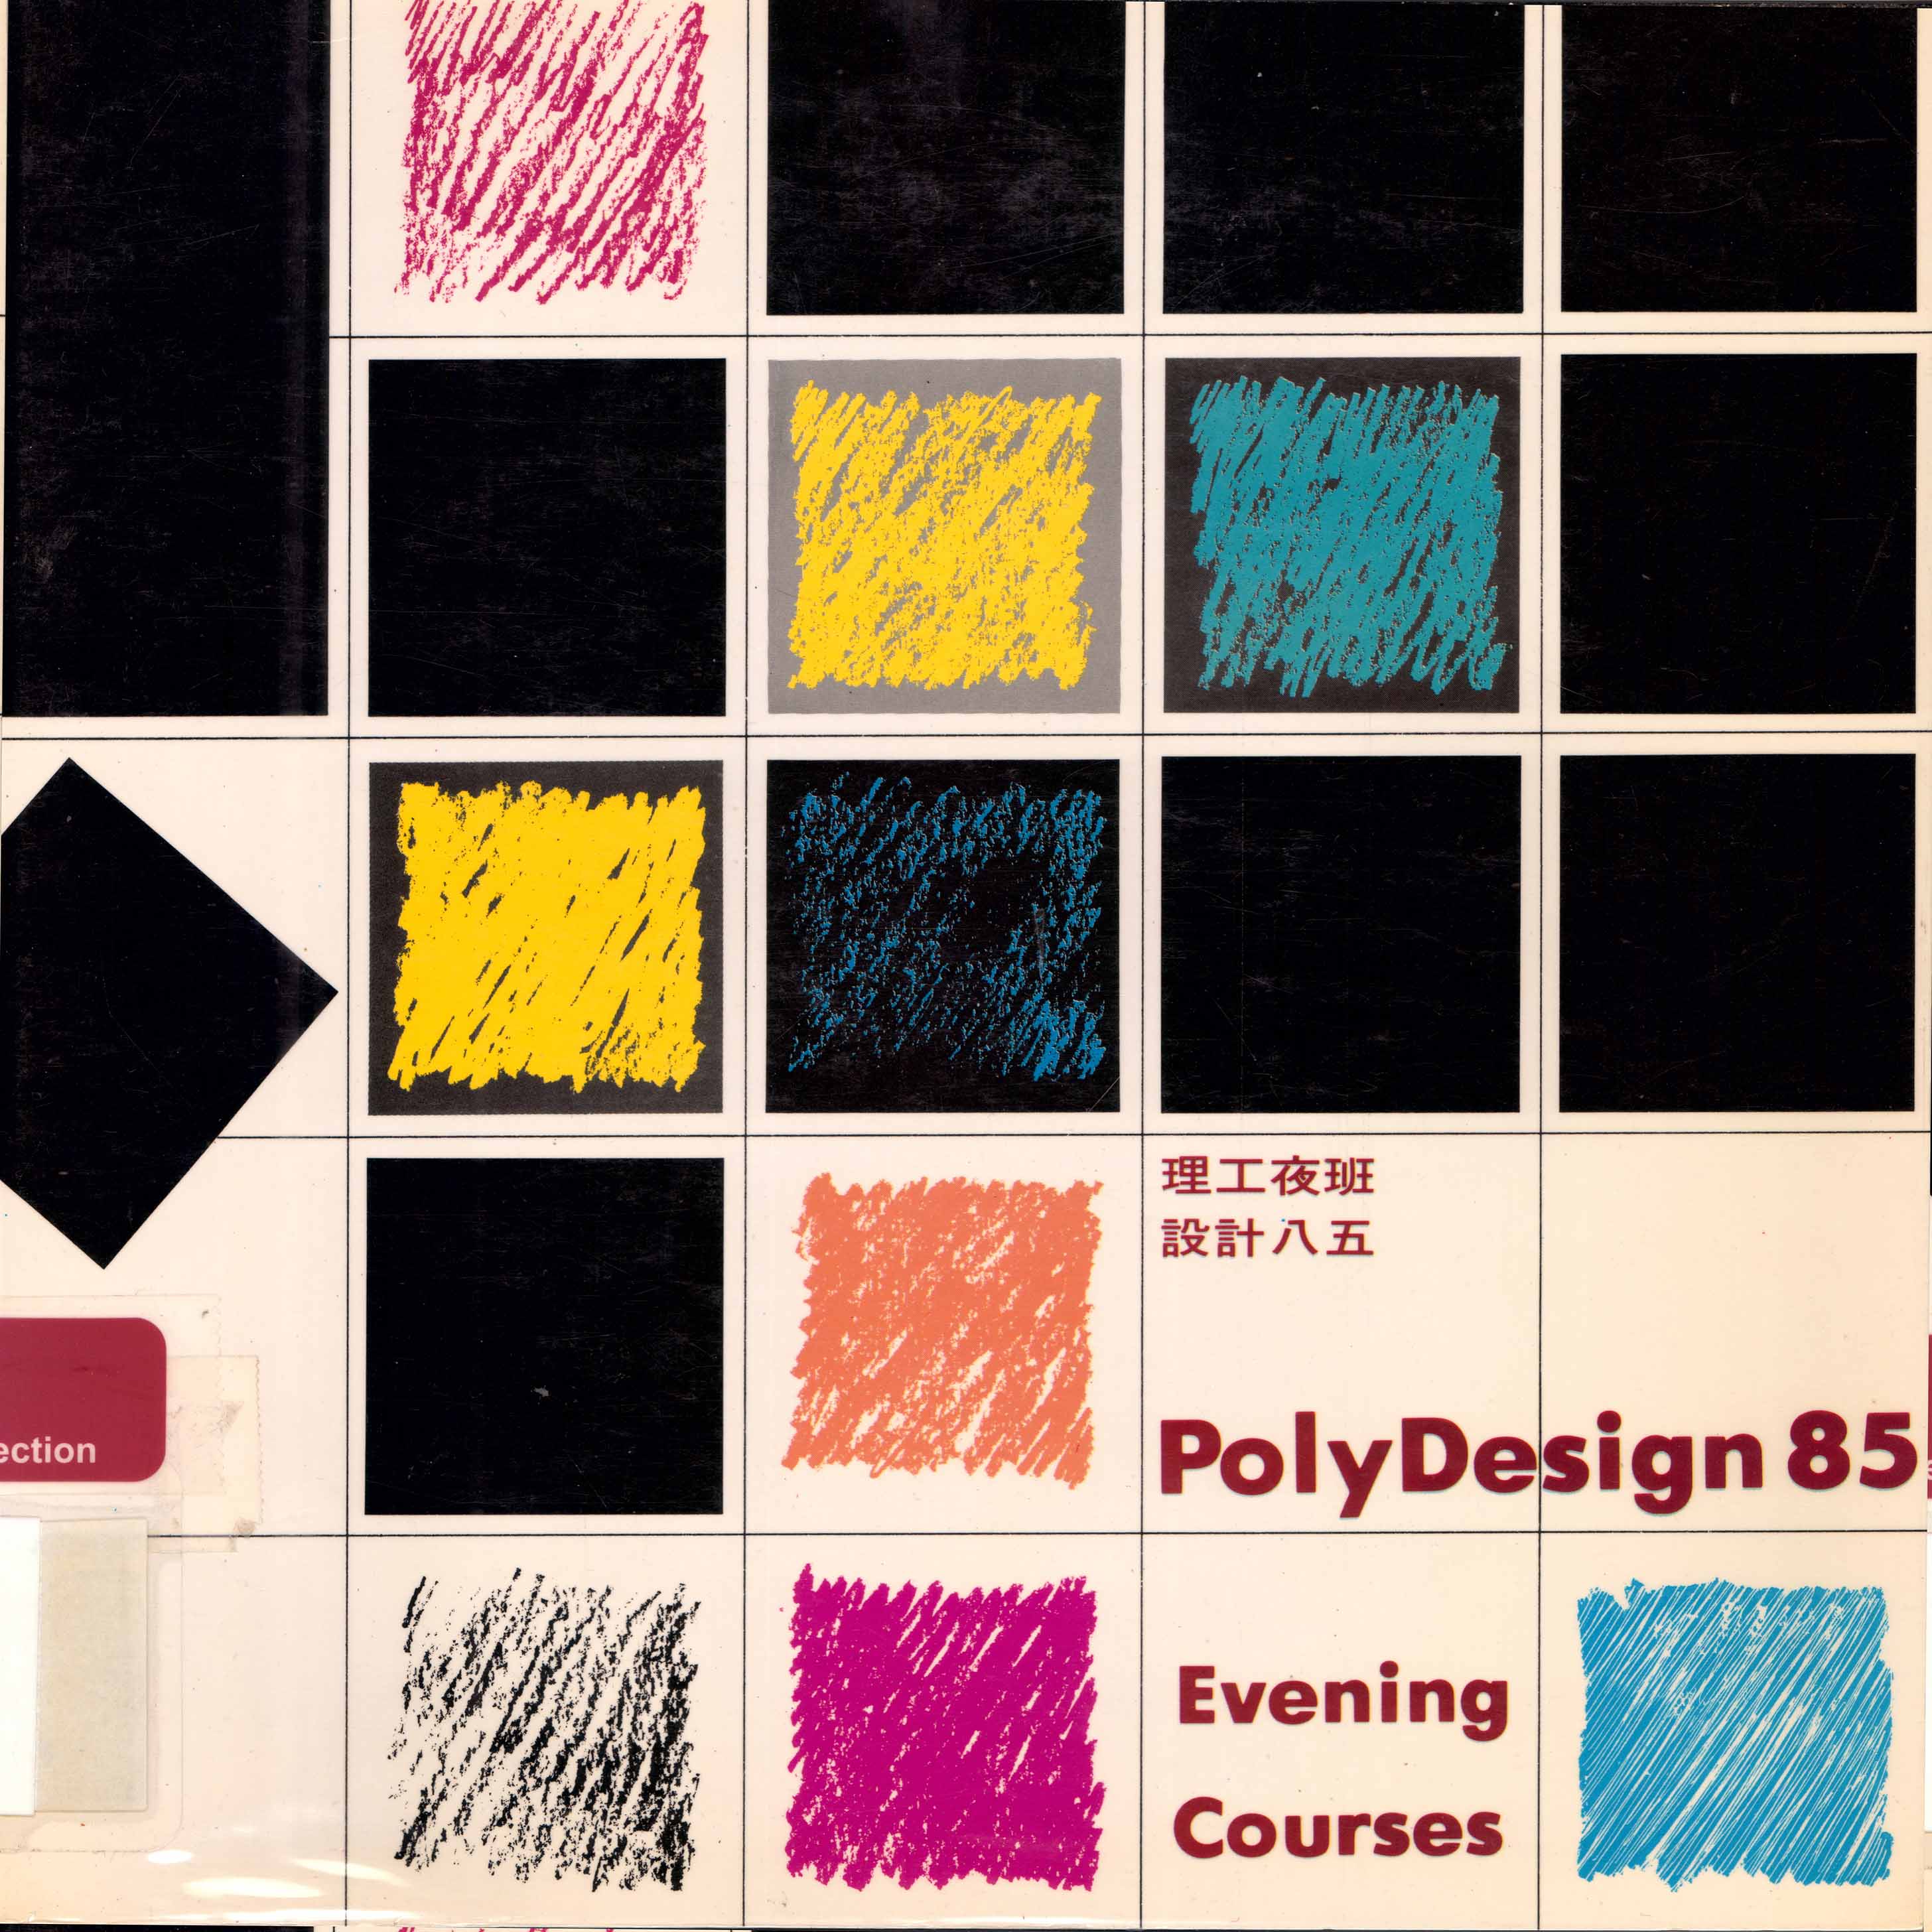 Polydesign 85 Evening Courses